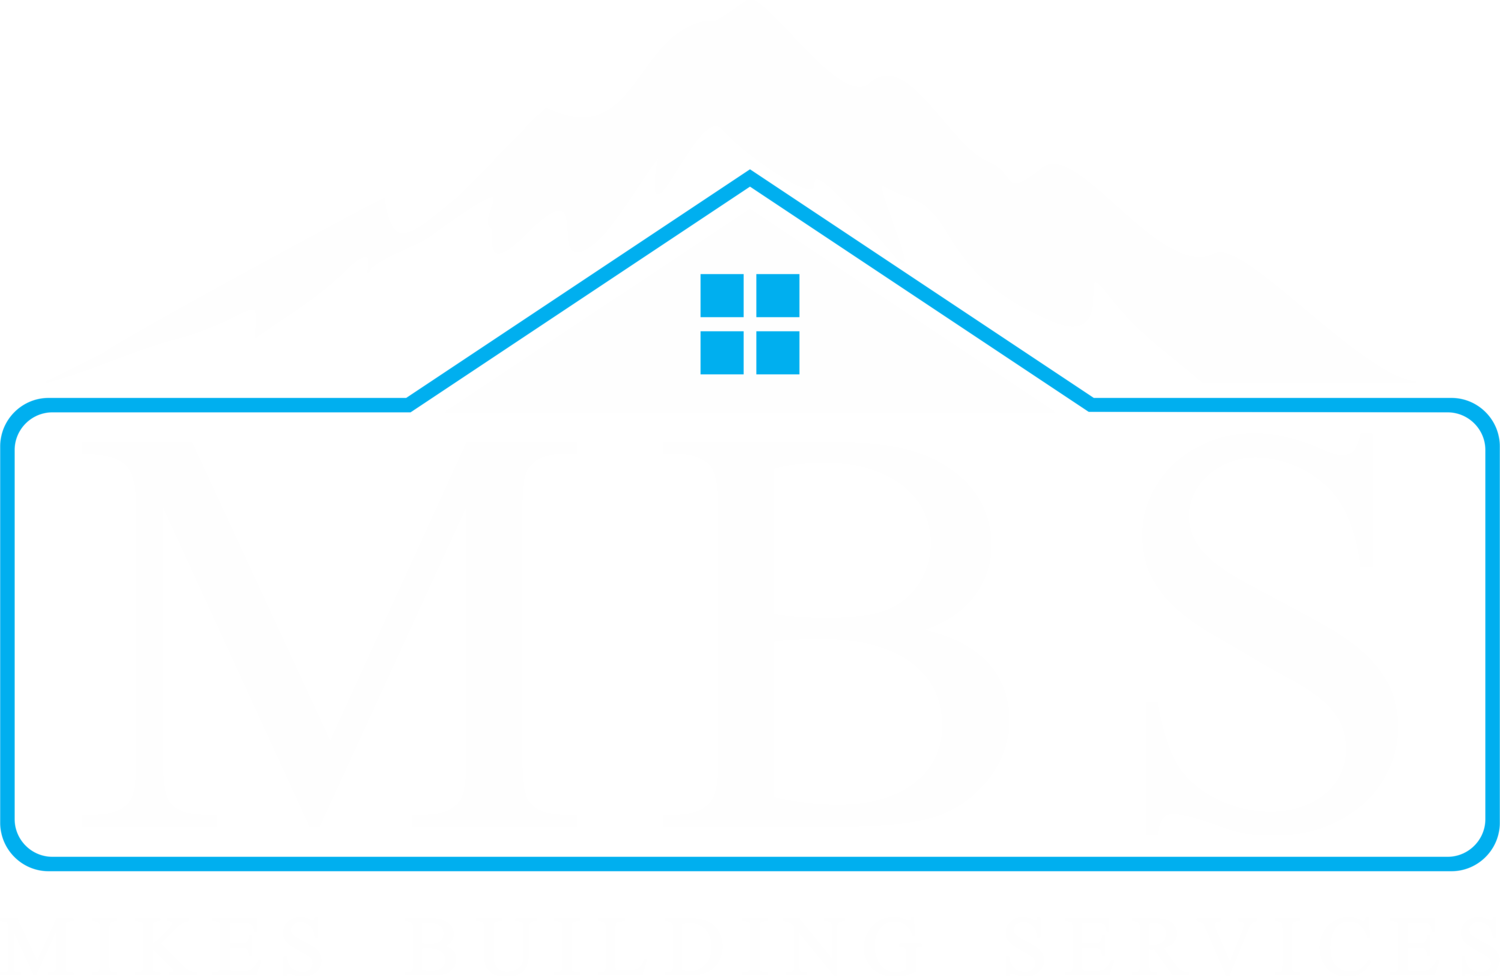 Mikes Building Services